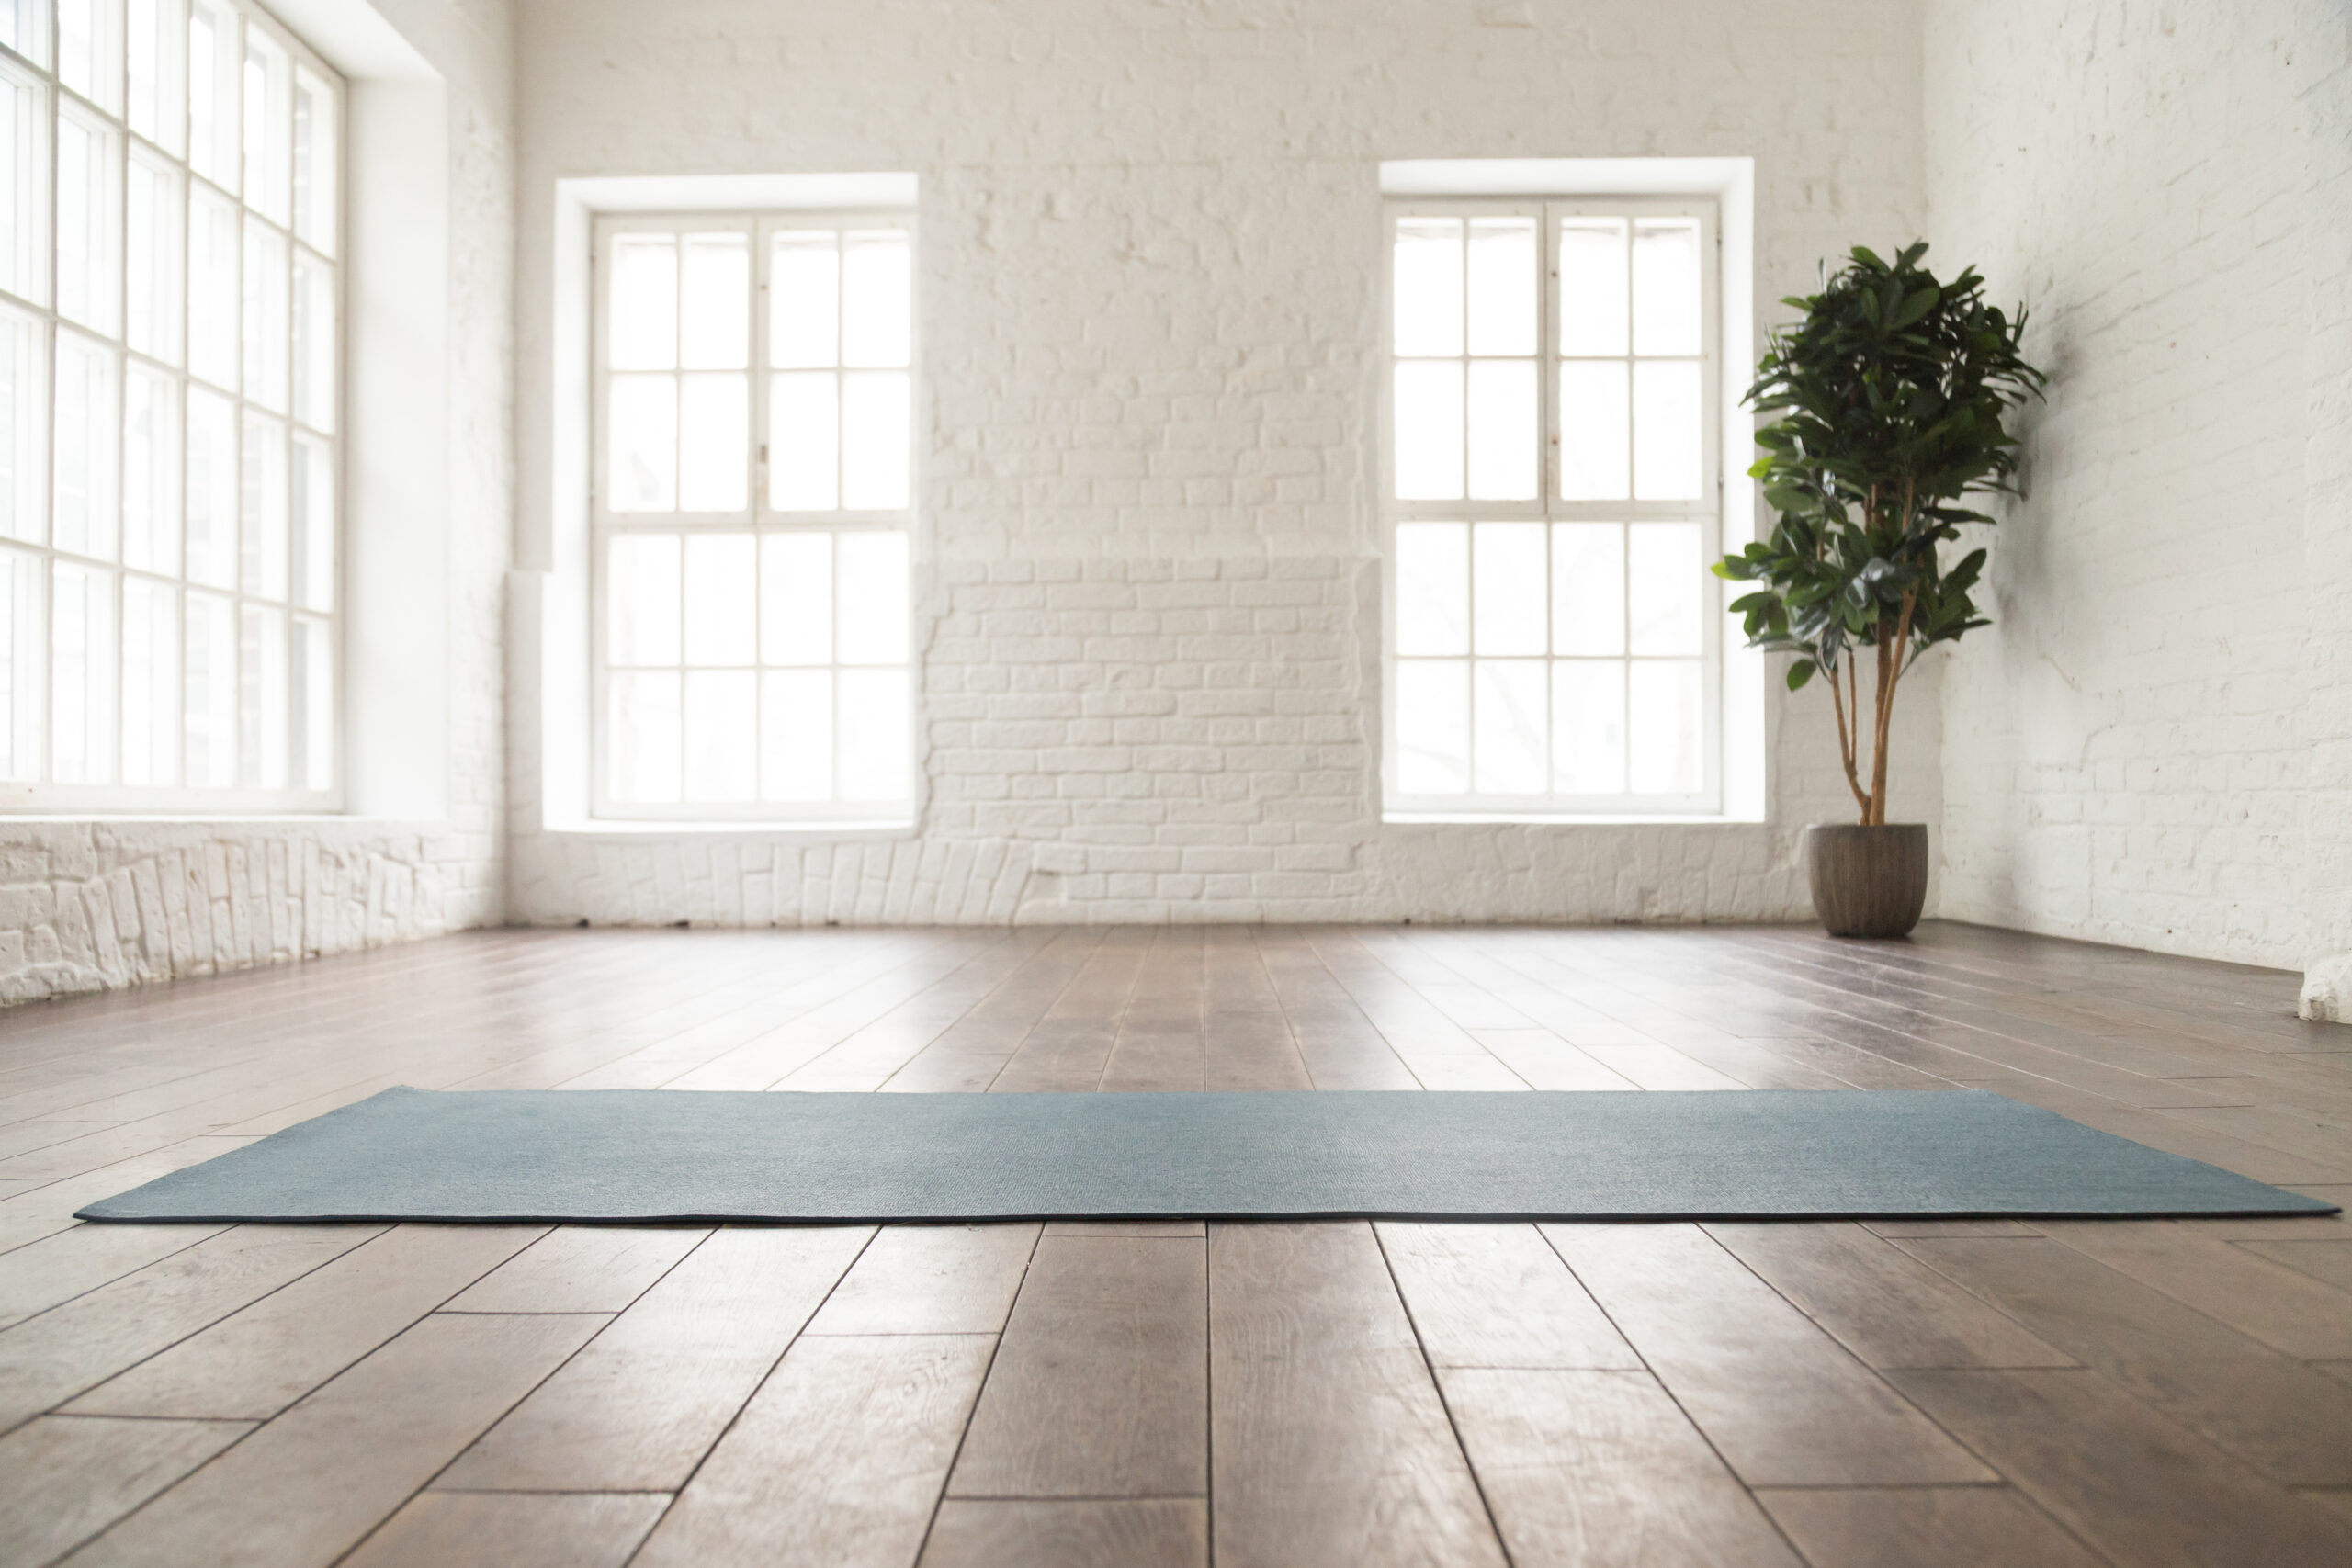 Meditation Room Ideas: Creating Your Perfect Zen Space